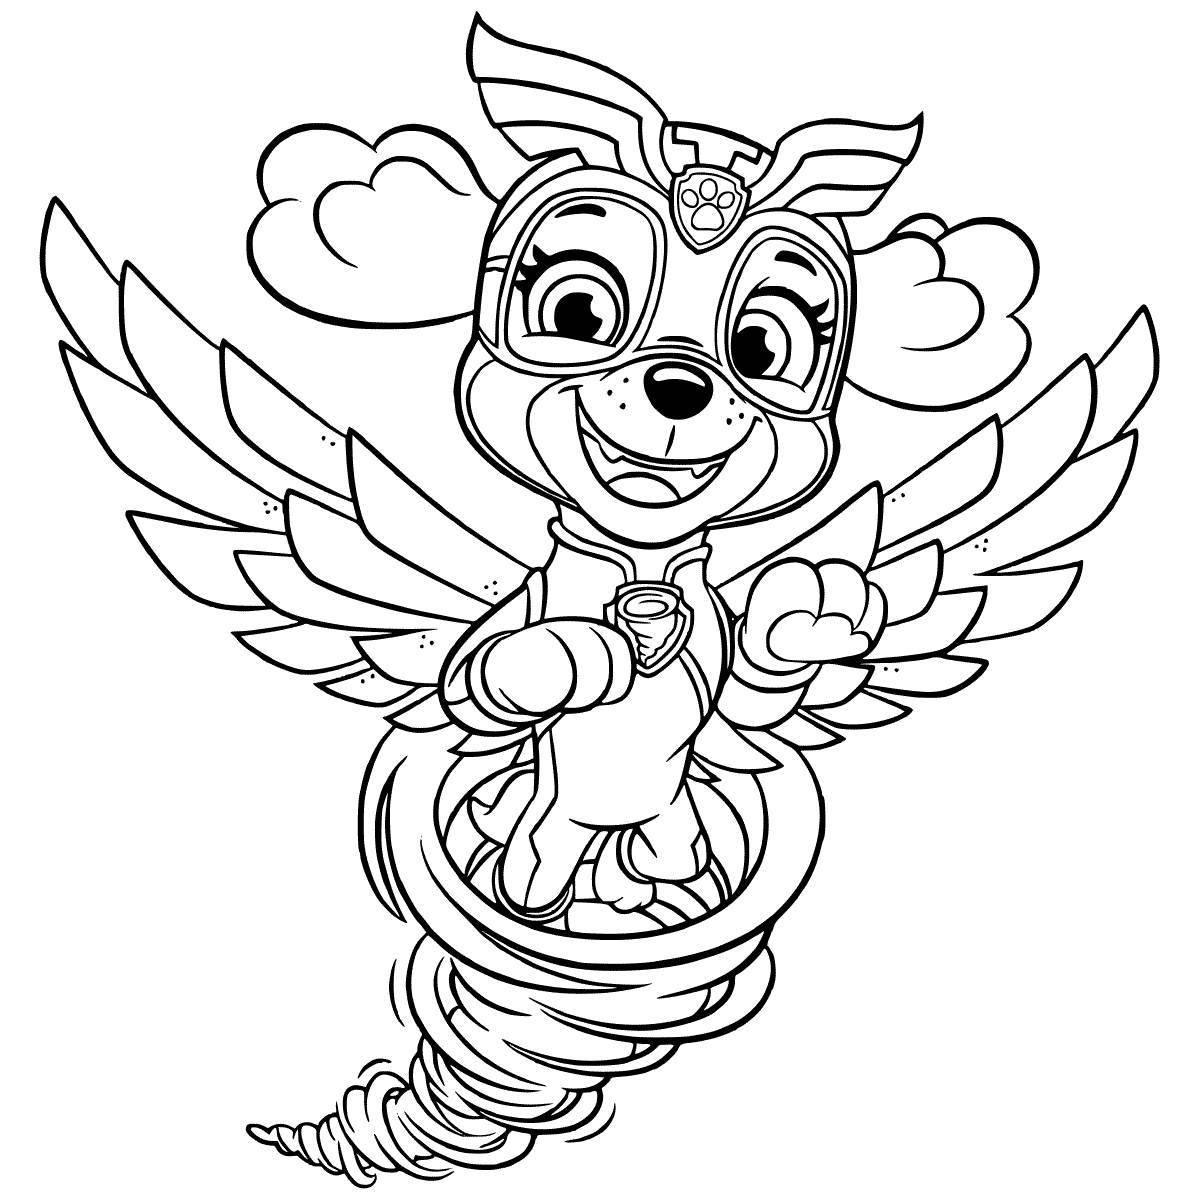 Cute paw patrol coloring page